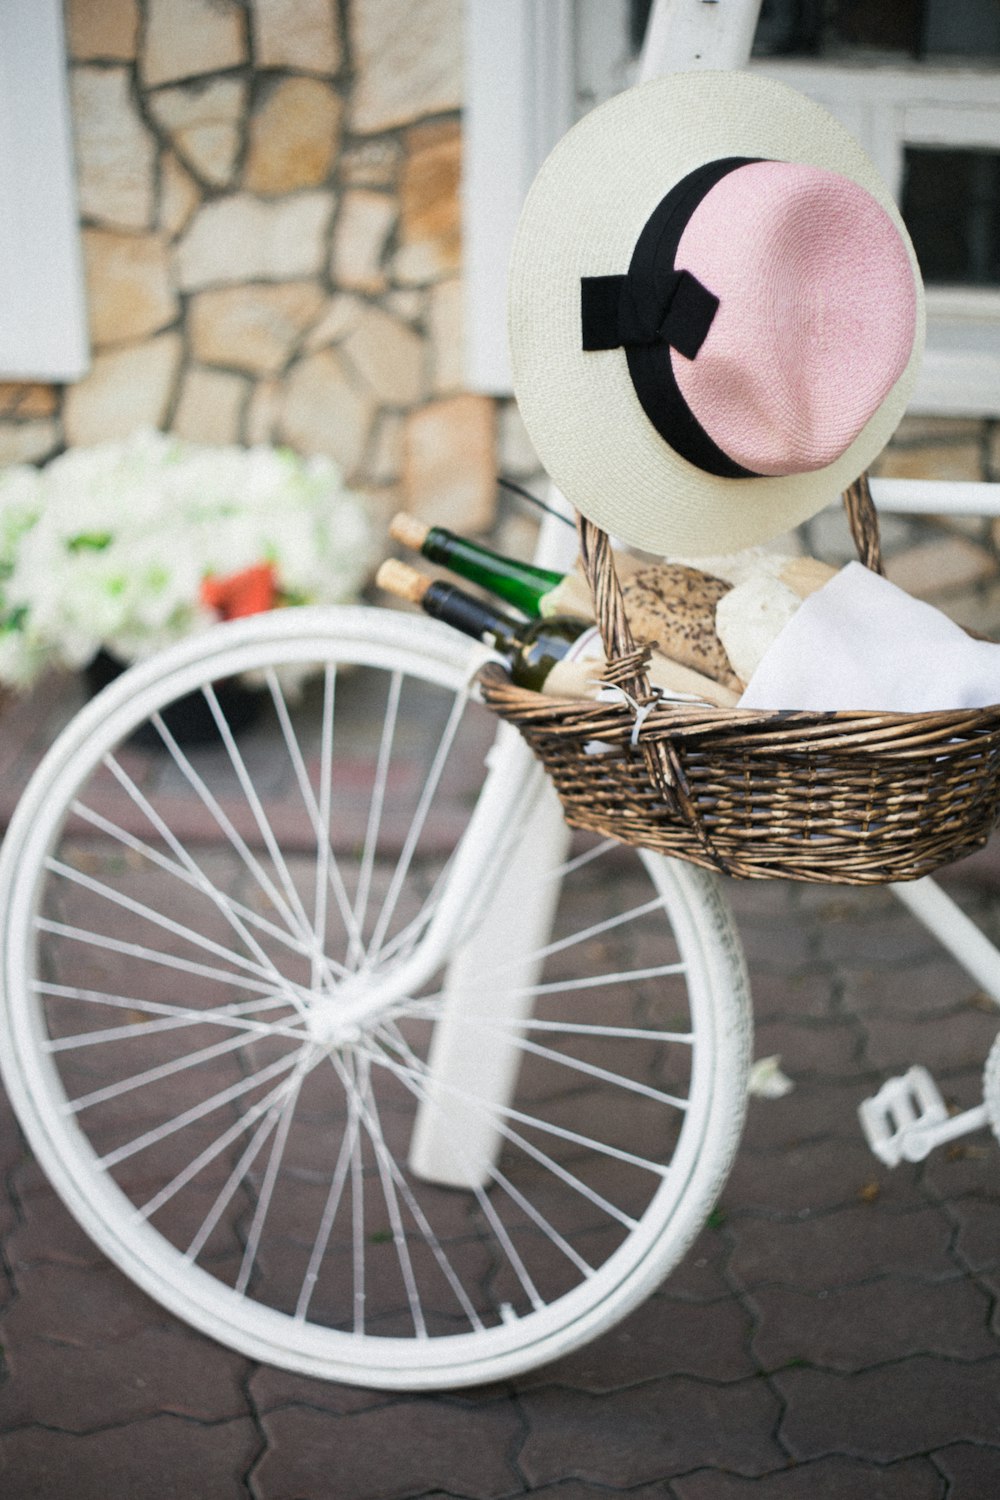 brown wicker basket with white, pink, and black sunhat besides white bike